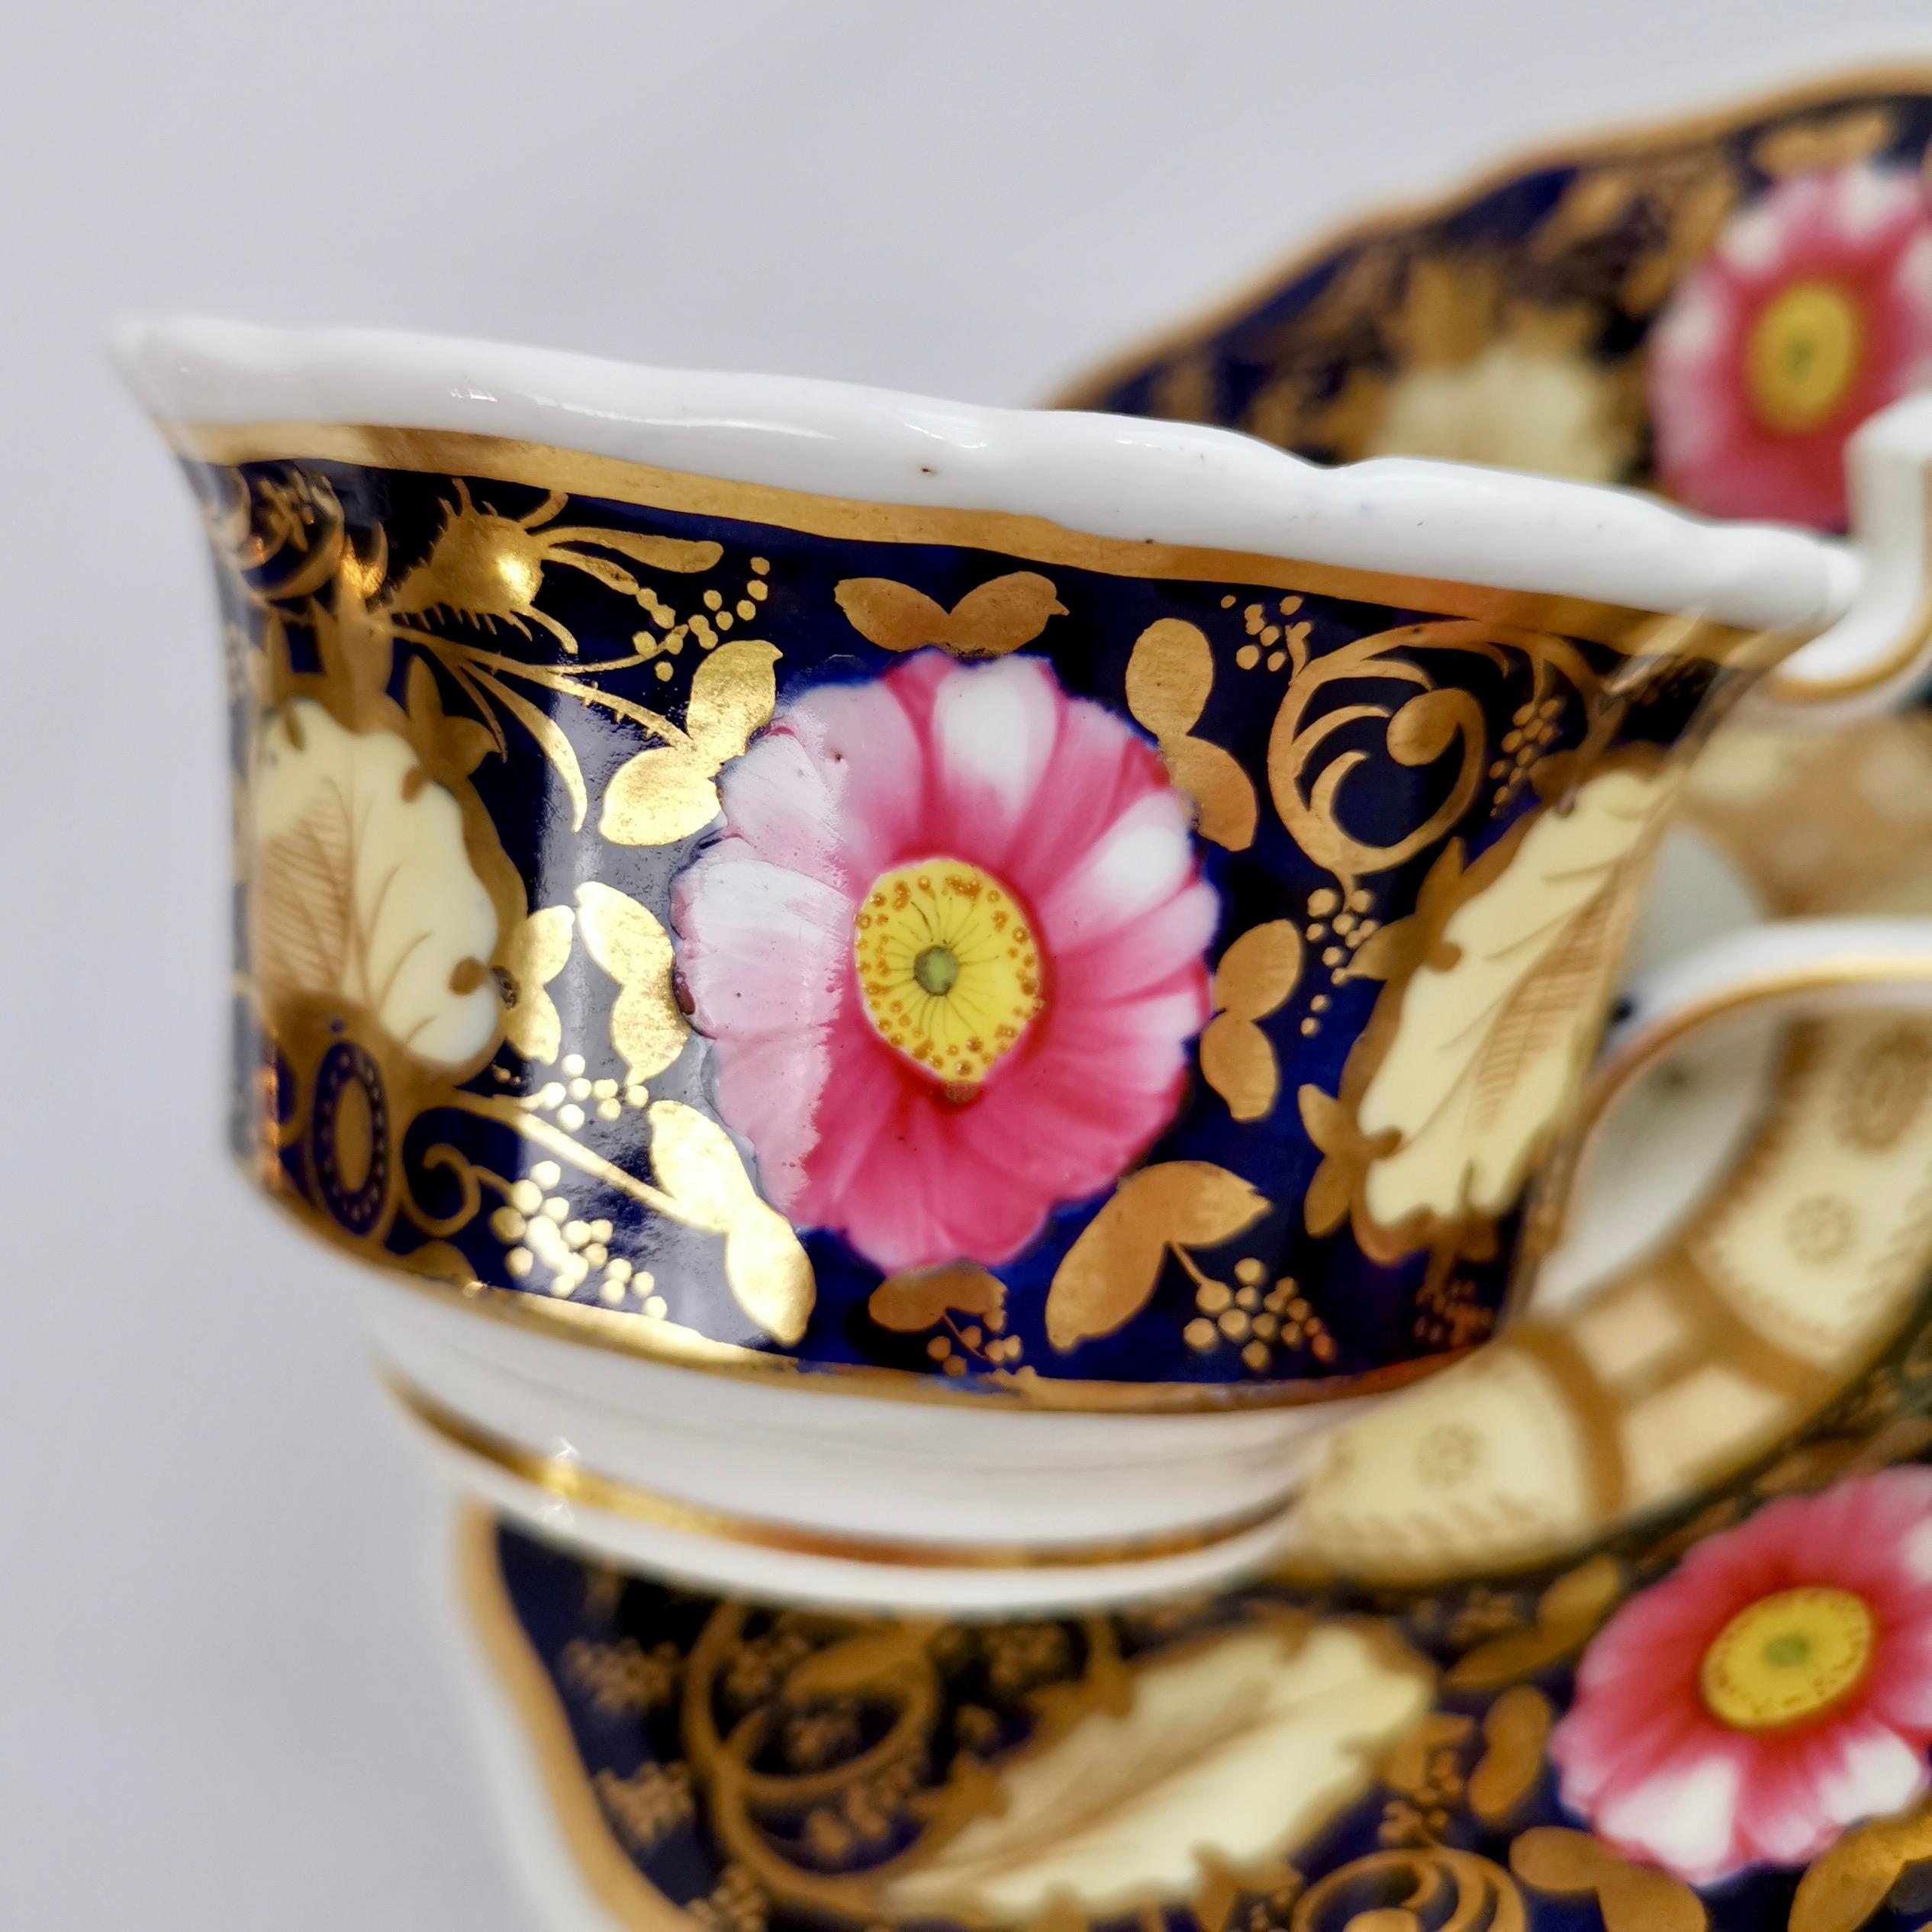 Early 19th Century Grainger Worcester Teacup, Cobalt Blue with Pink Roses, Regency, circa 1825